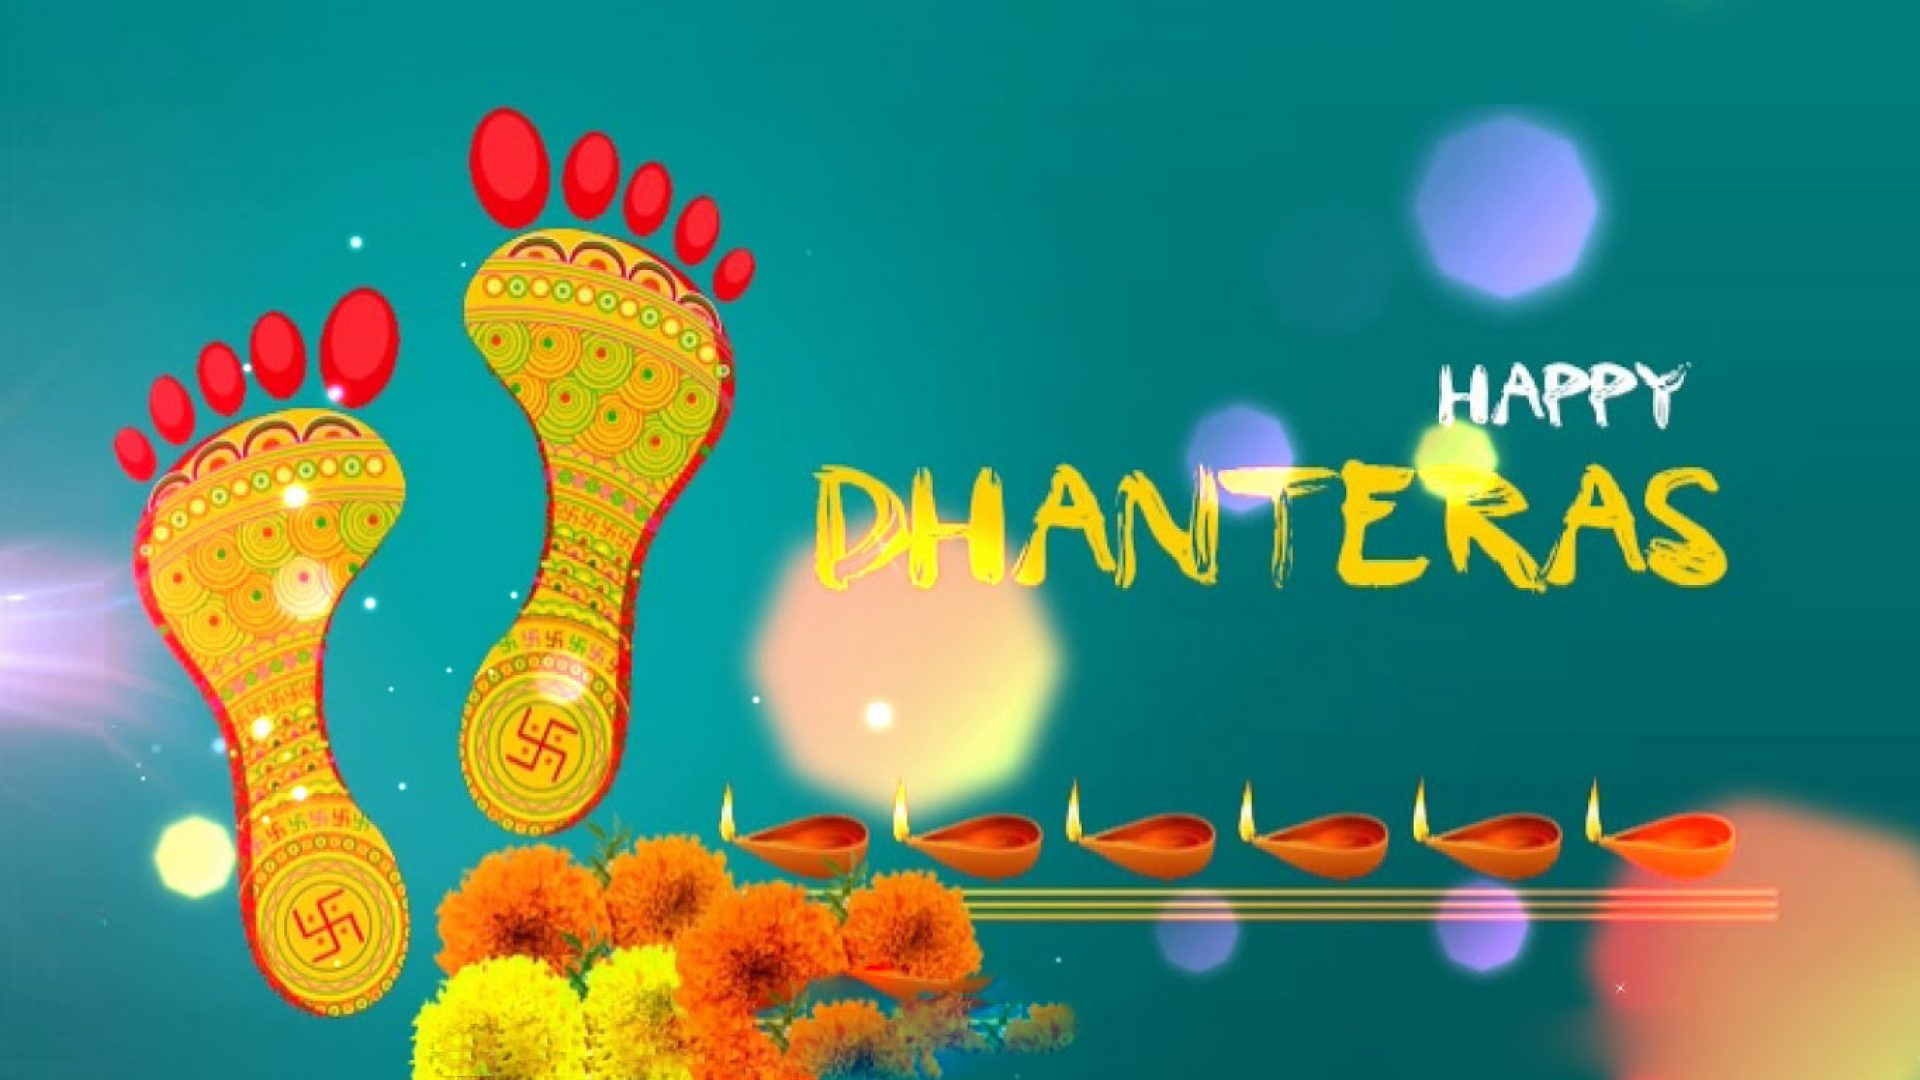 Happy Dhanteras Images For Whatsapp | Dhanteras